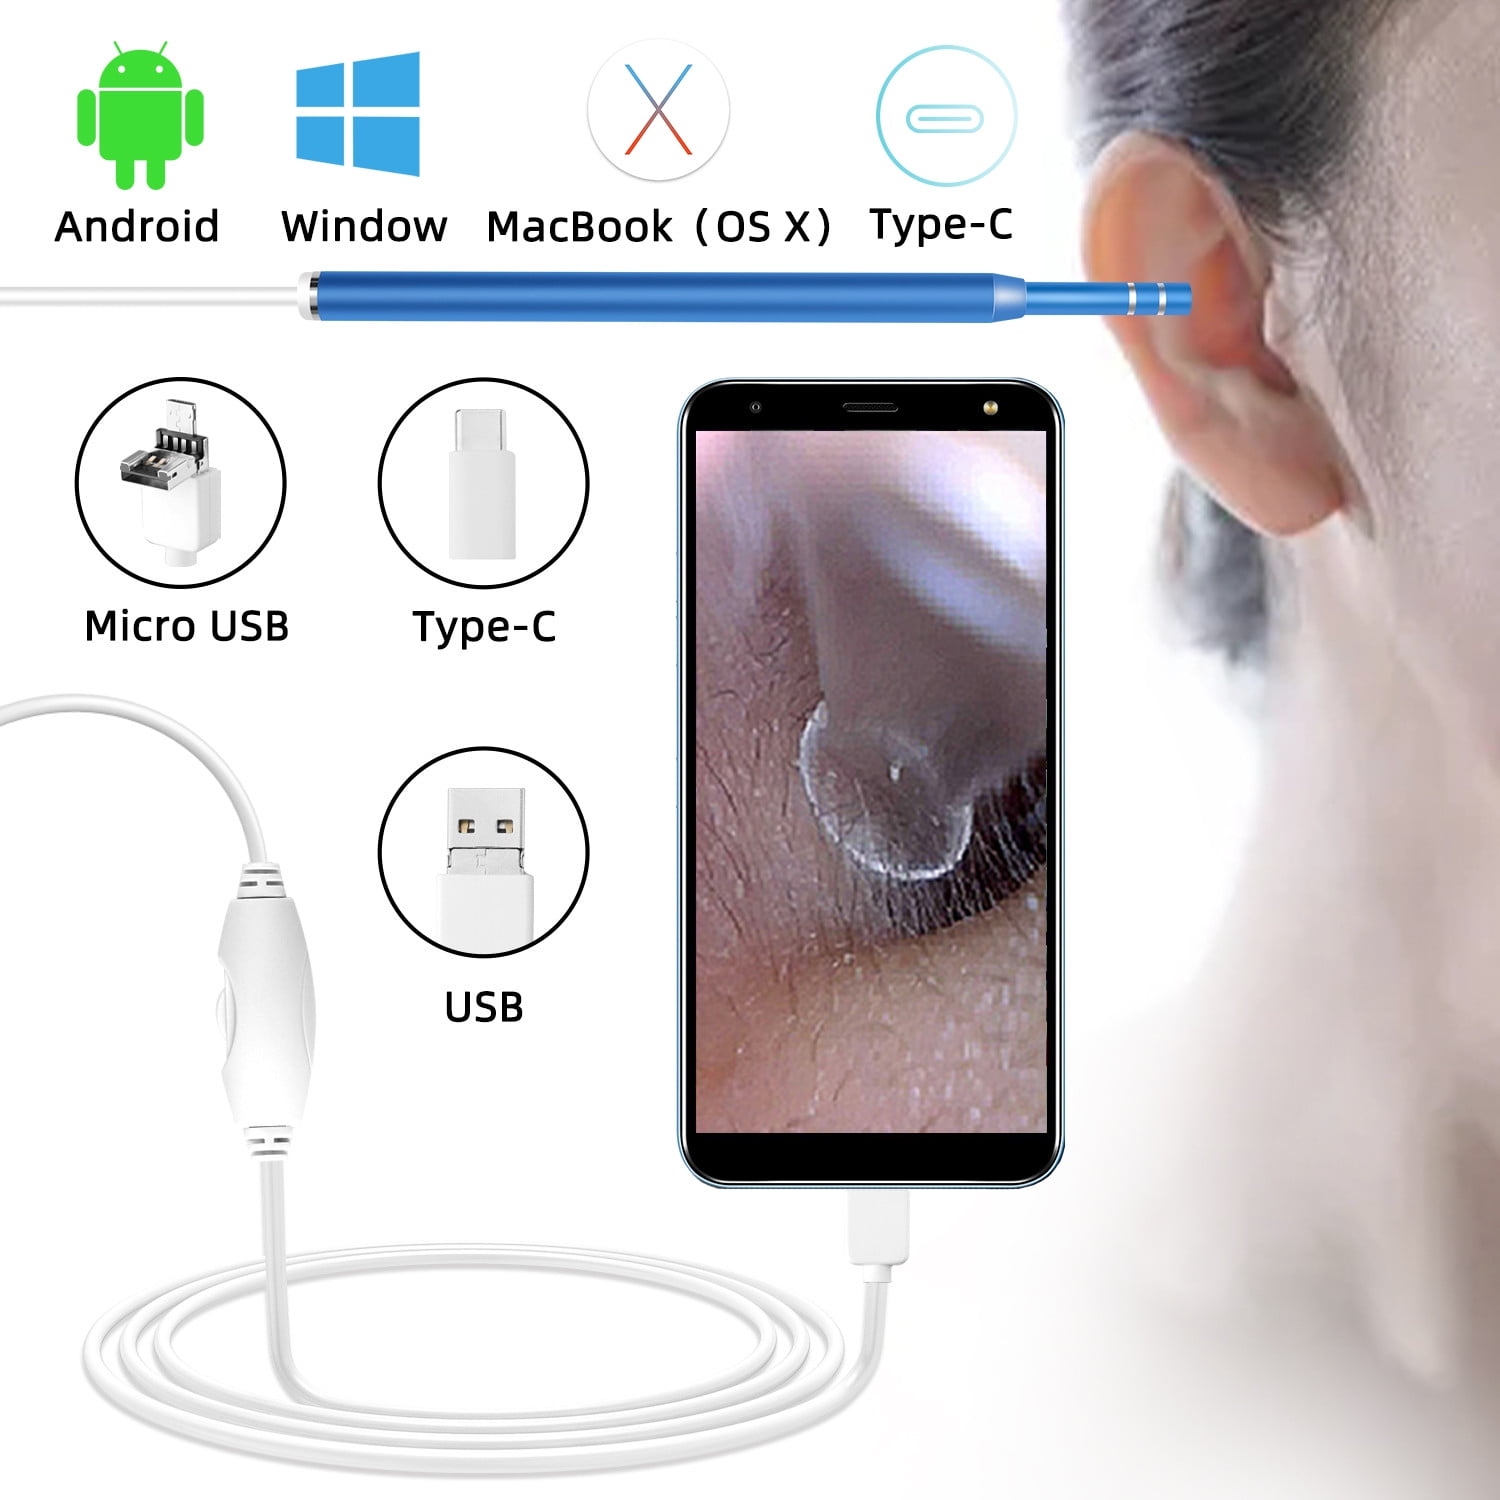 USB Ear Scope Camera HD Earwax Removal Tool Kit for Kids and Adults Compatible with Android and Windows PC 5.5mm Diameter Digital Ear Endoscope Otoscope 